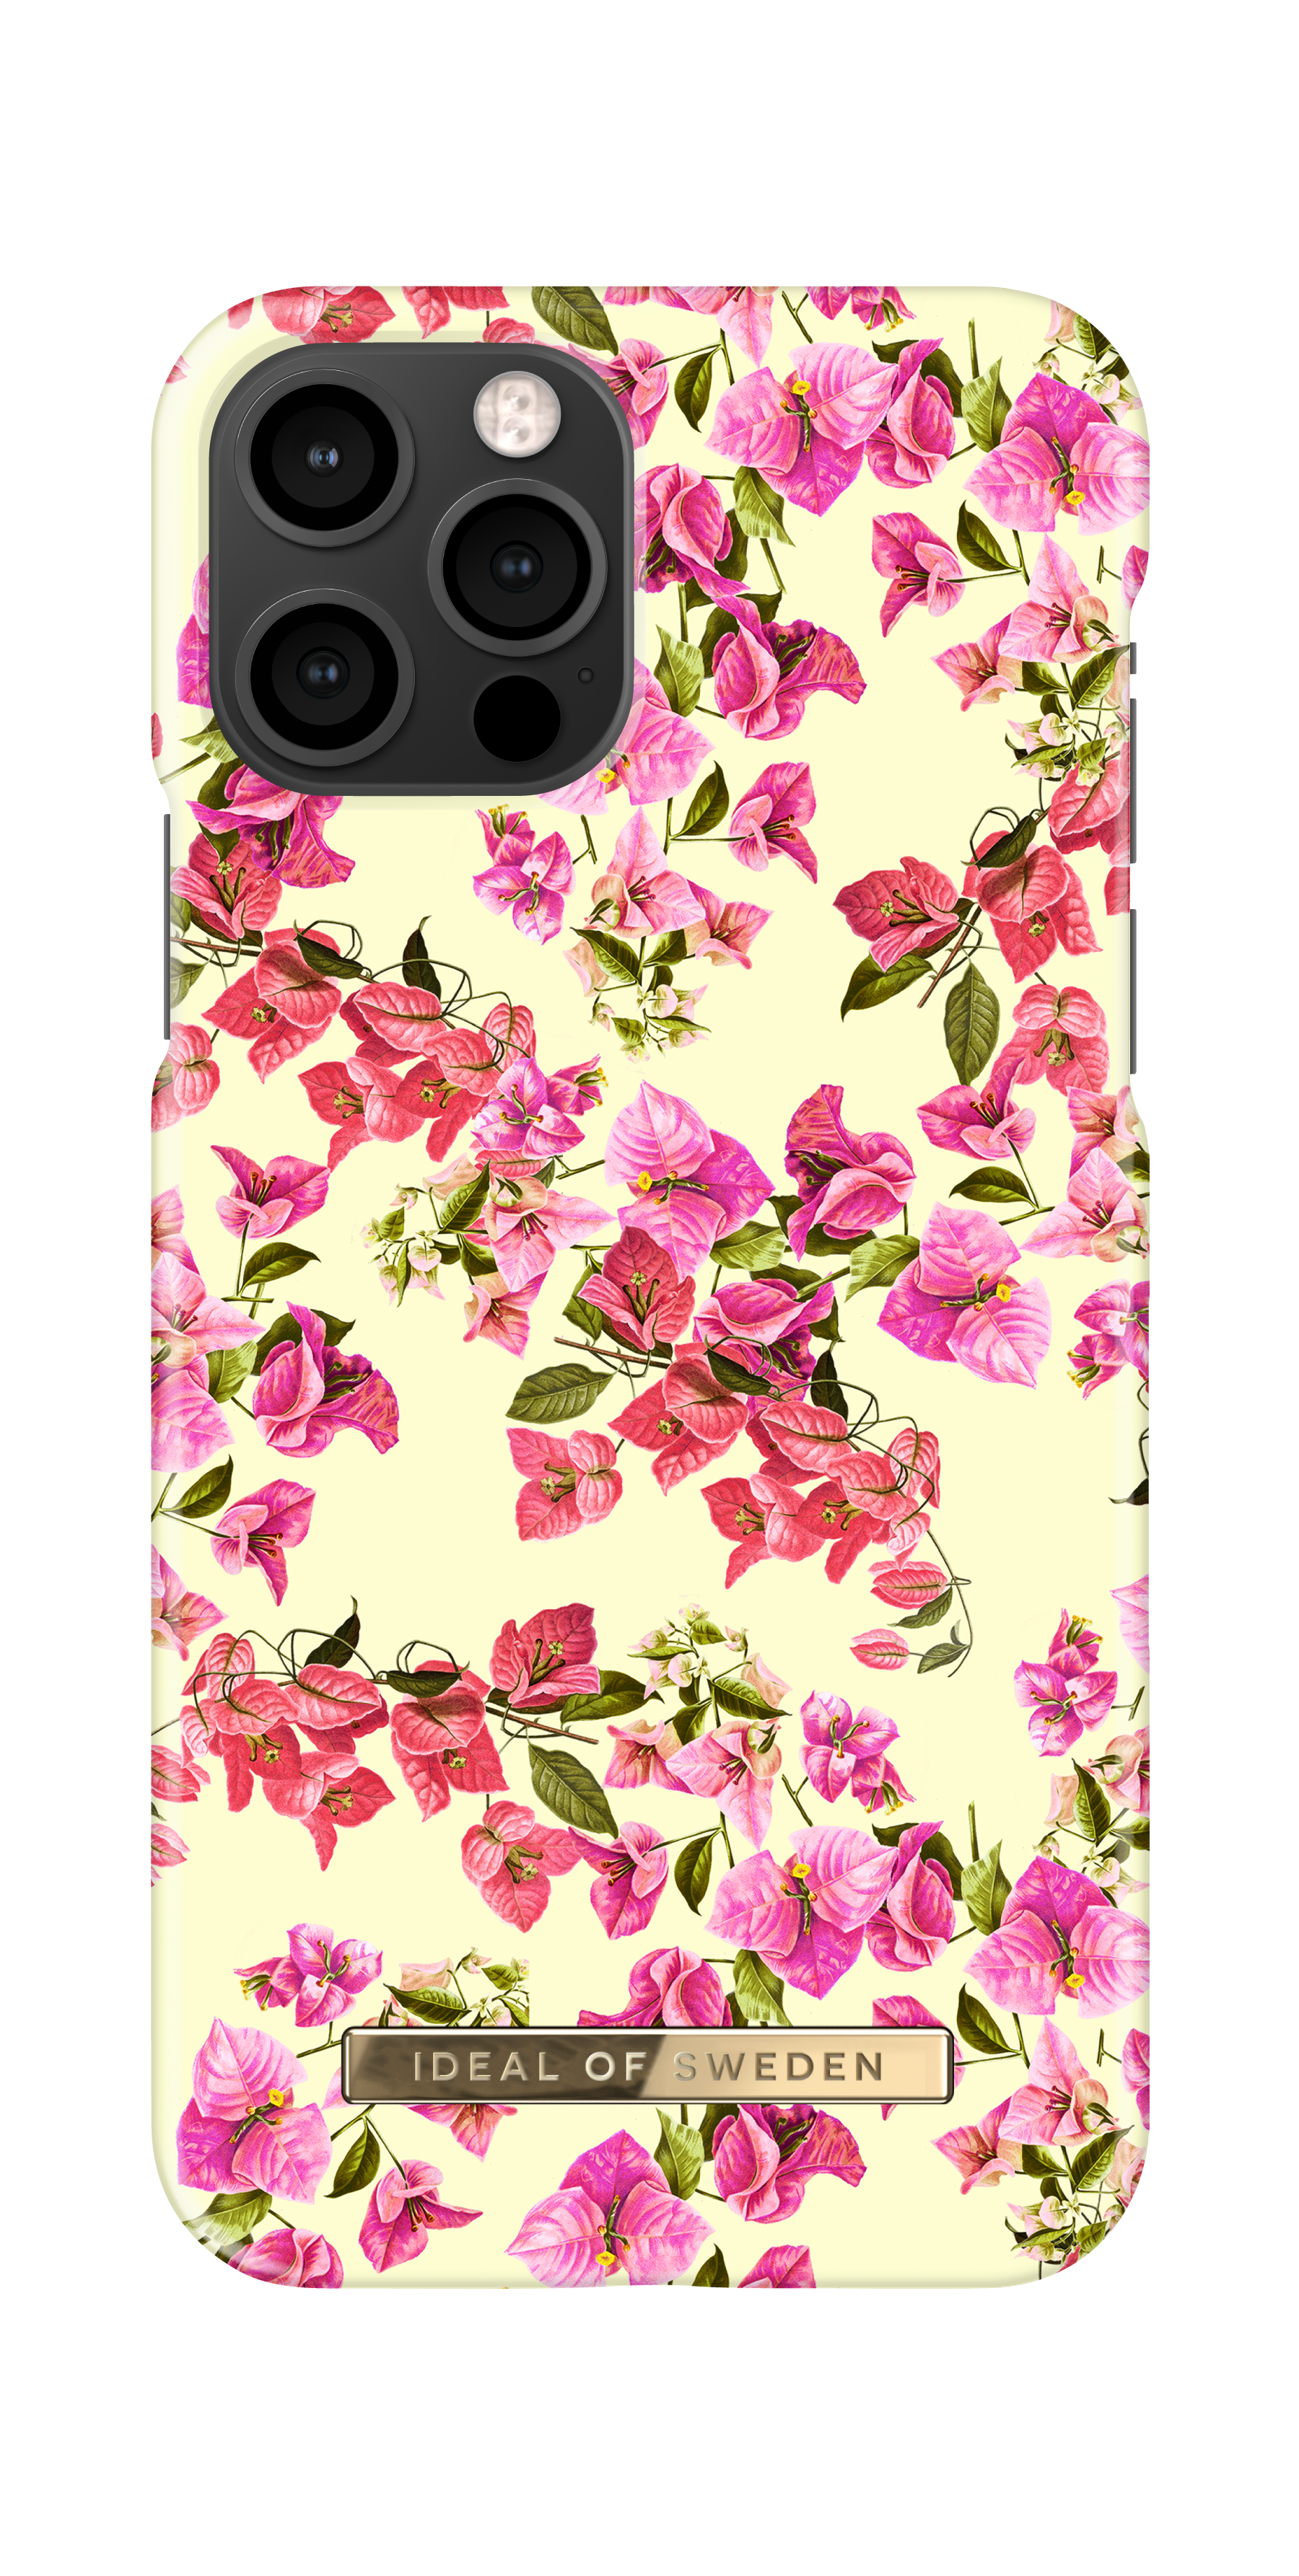 12 12, Backcover, Lemon SWEDEN Bloom IDEAL OF Pro, Apple, iPhone iPhone IDFCSS21-I2061-259,